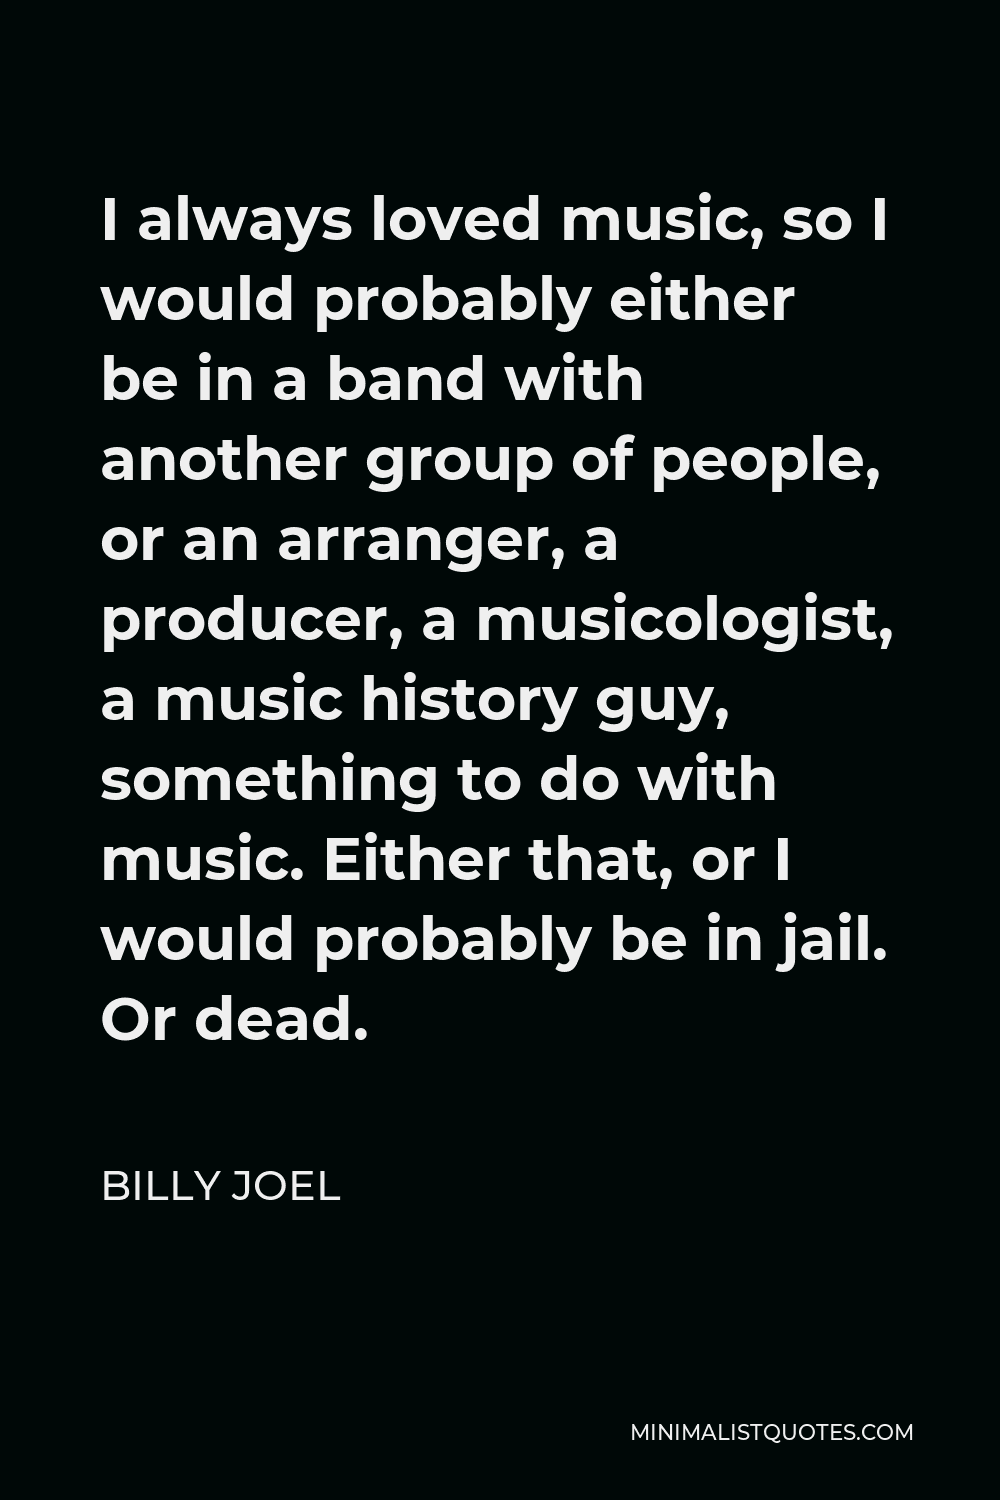 Billy Joel Quote - I always loved music, so I would probably either be in a band with another group of people, or an arranger, a producer, a musicologist, a music history guy, something to do with music. Either that, or I would probably be in jail. Or dead.